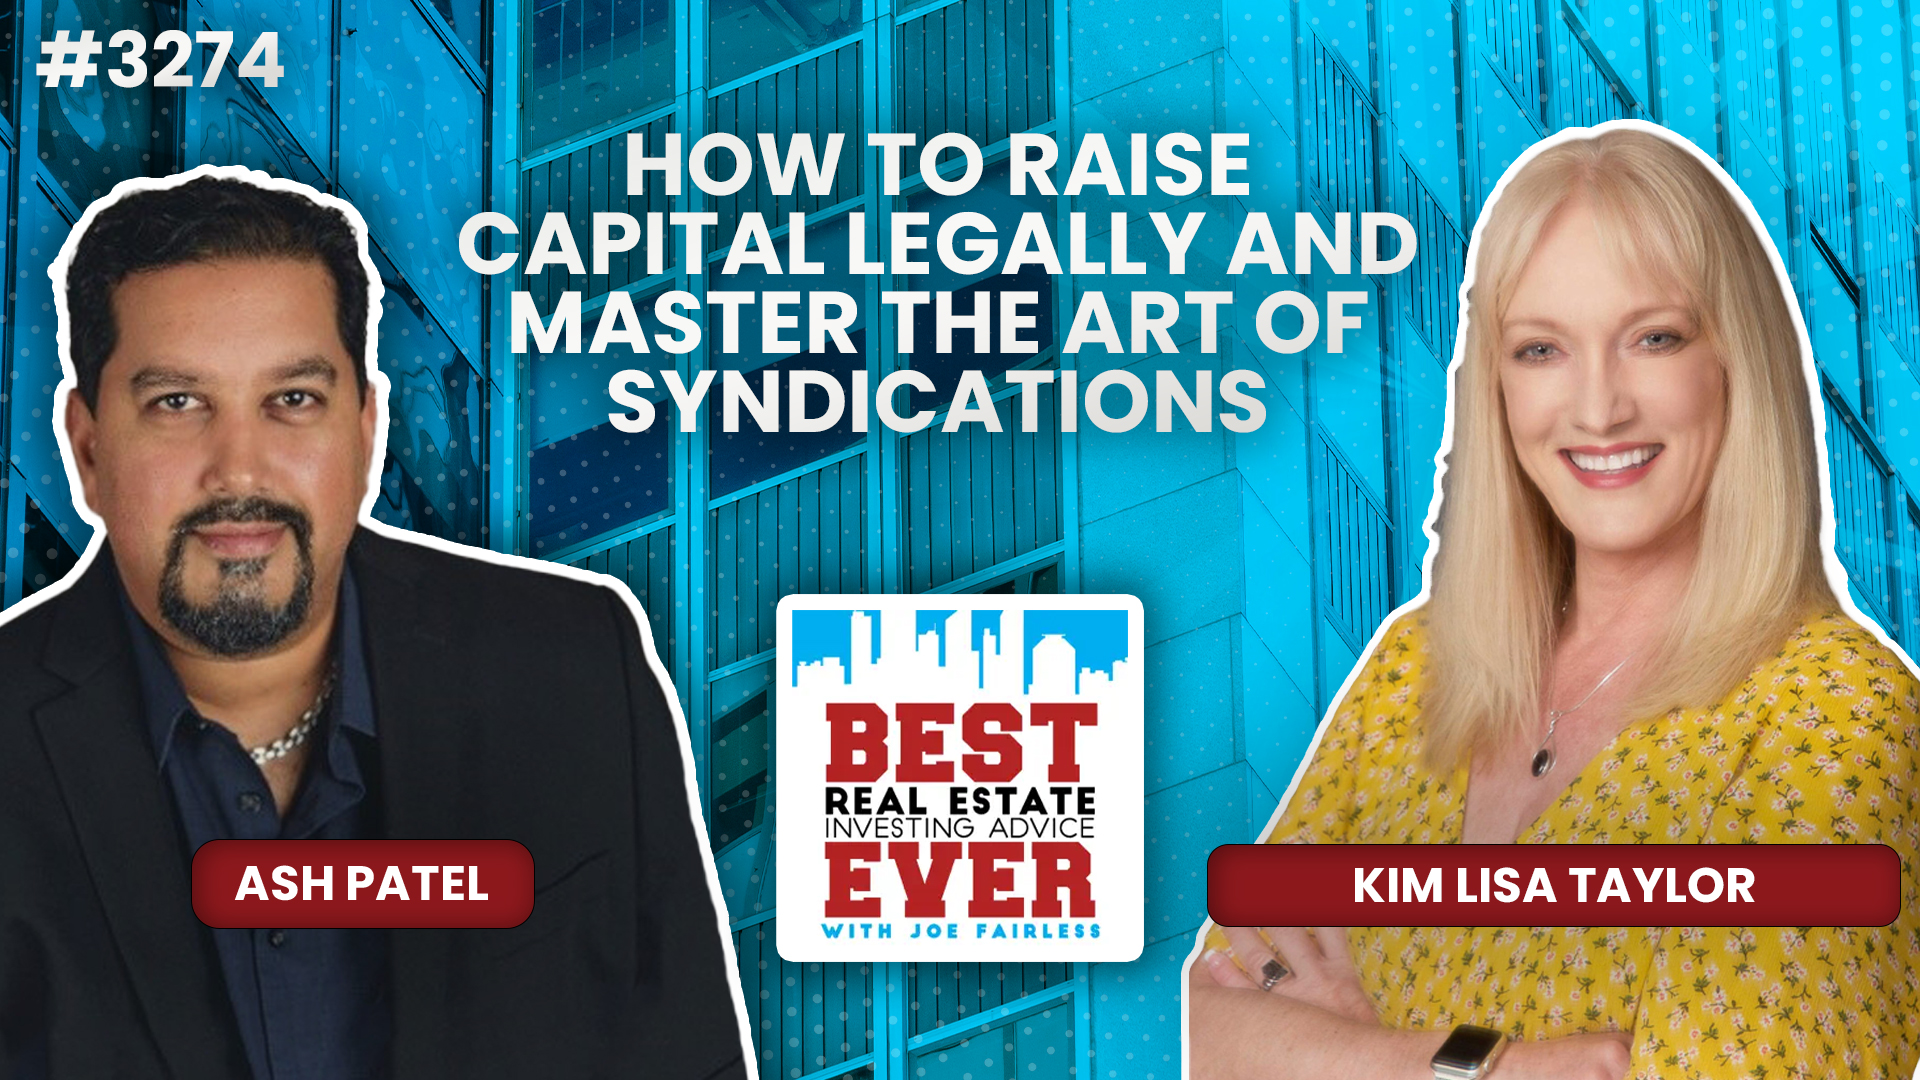 JF3274: Kim Lisa Taylor — How to Raise Capital Legally and Master the Art of Syndications